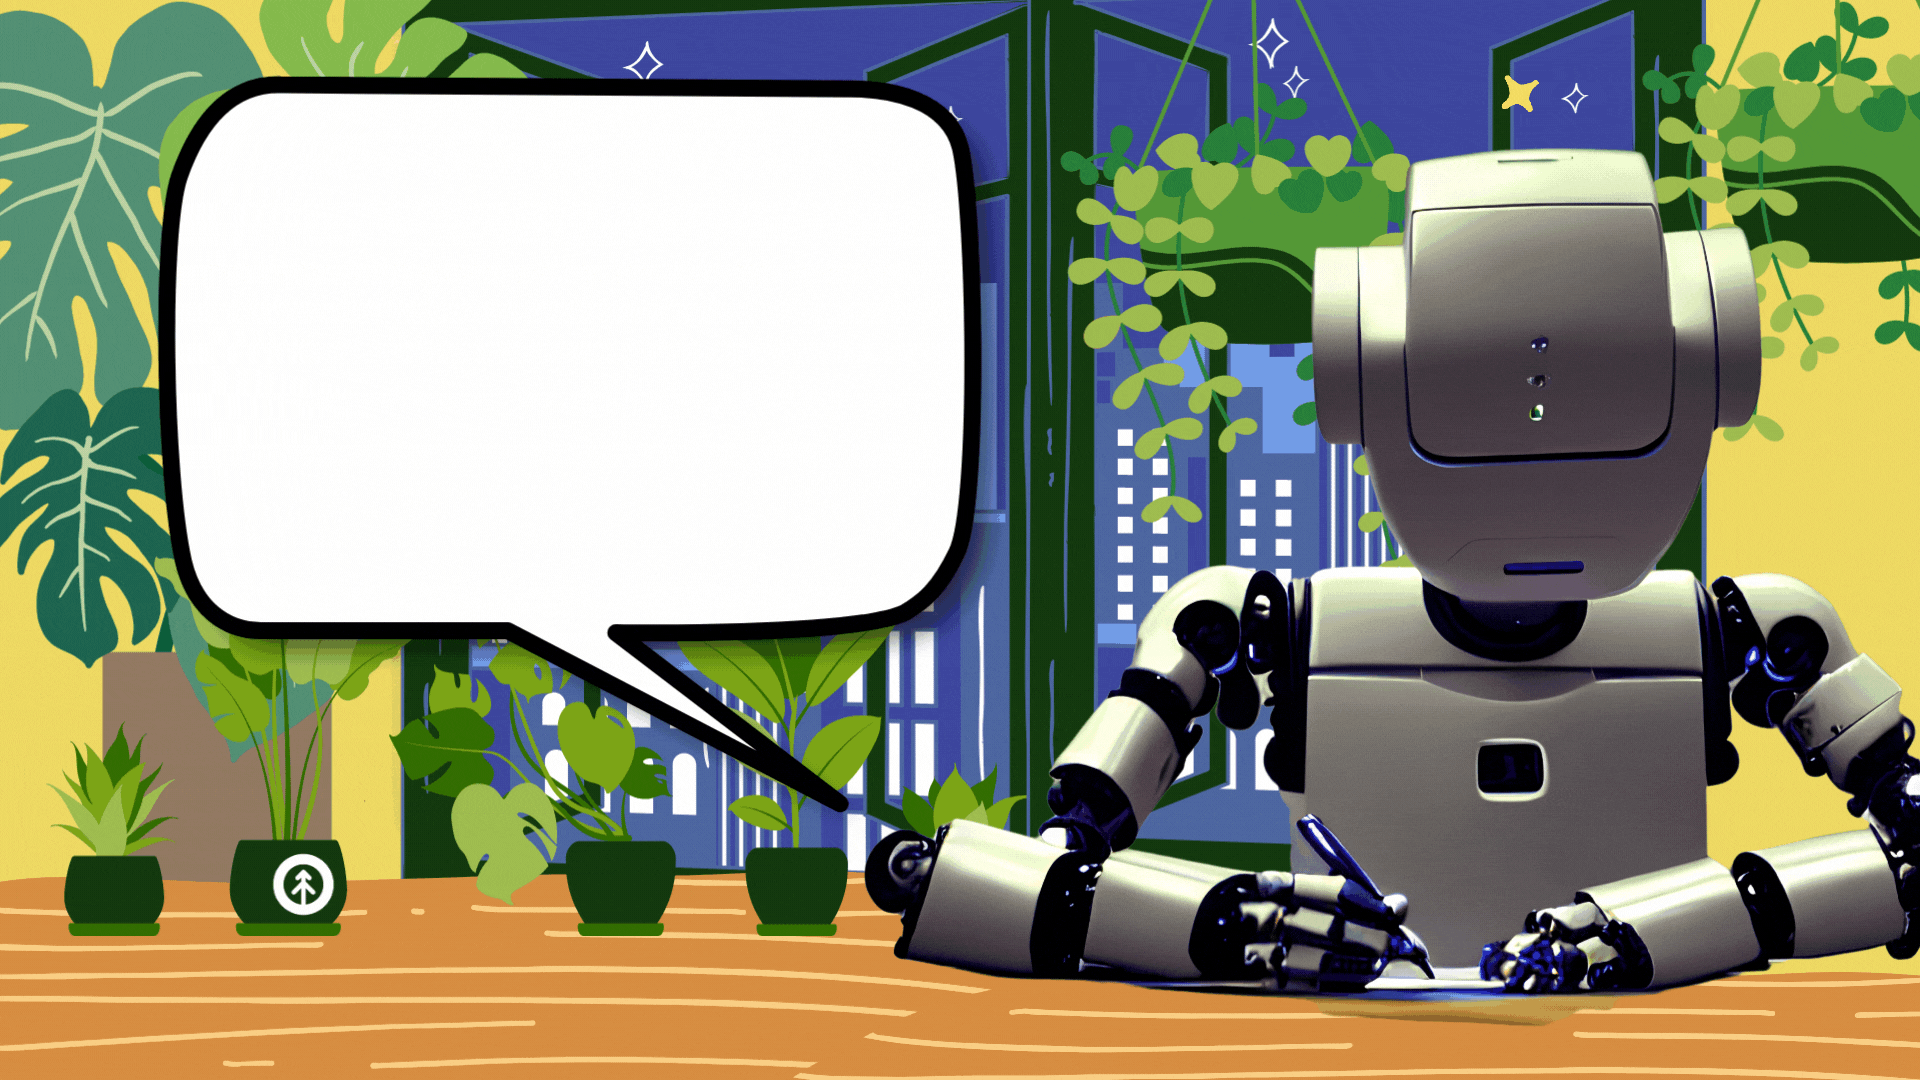 A realistic image of a robot writing with a pen against a cartoonish background with plants, a cityscape window, and a desk. A large speech bubble contains the title of the blog article "A Copywriter's Conversation with ChatGPT about ChatGPT."